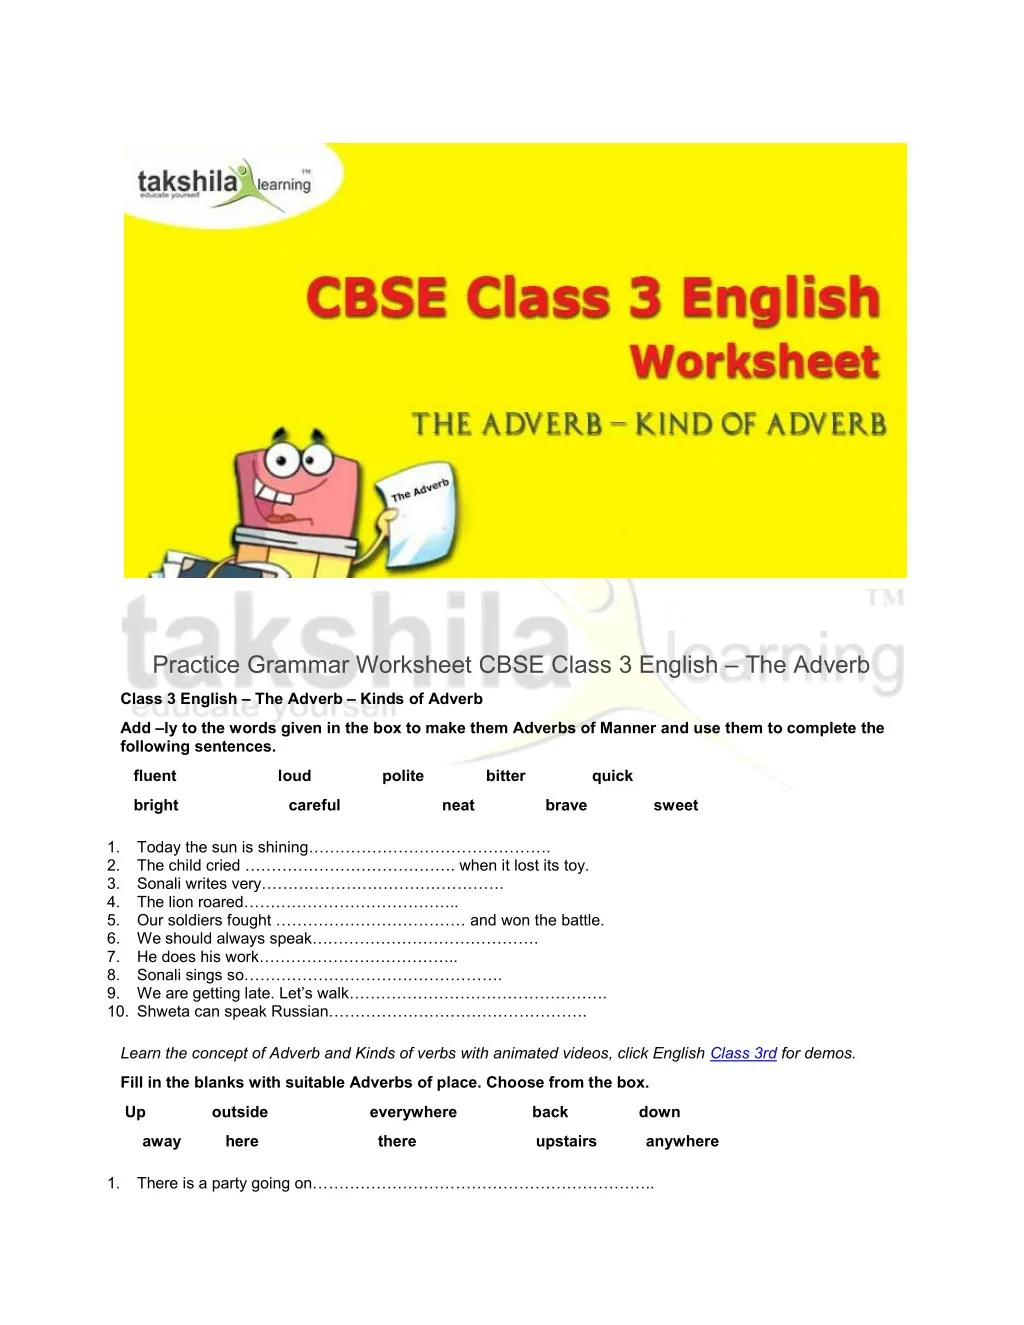 PPT Practice Grammar Worksheet For CBSE Class 3 English The Adverb 